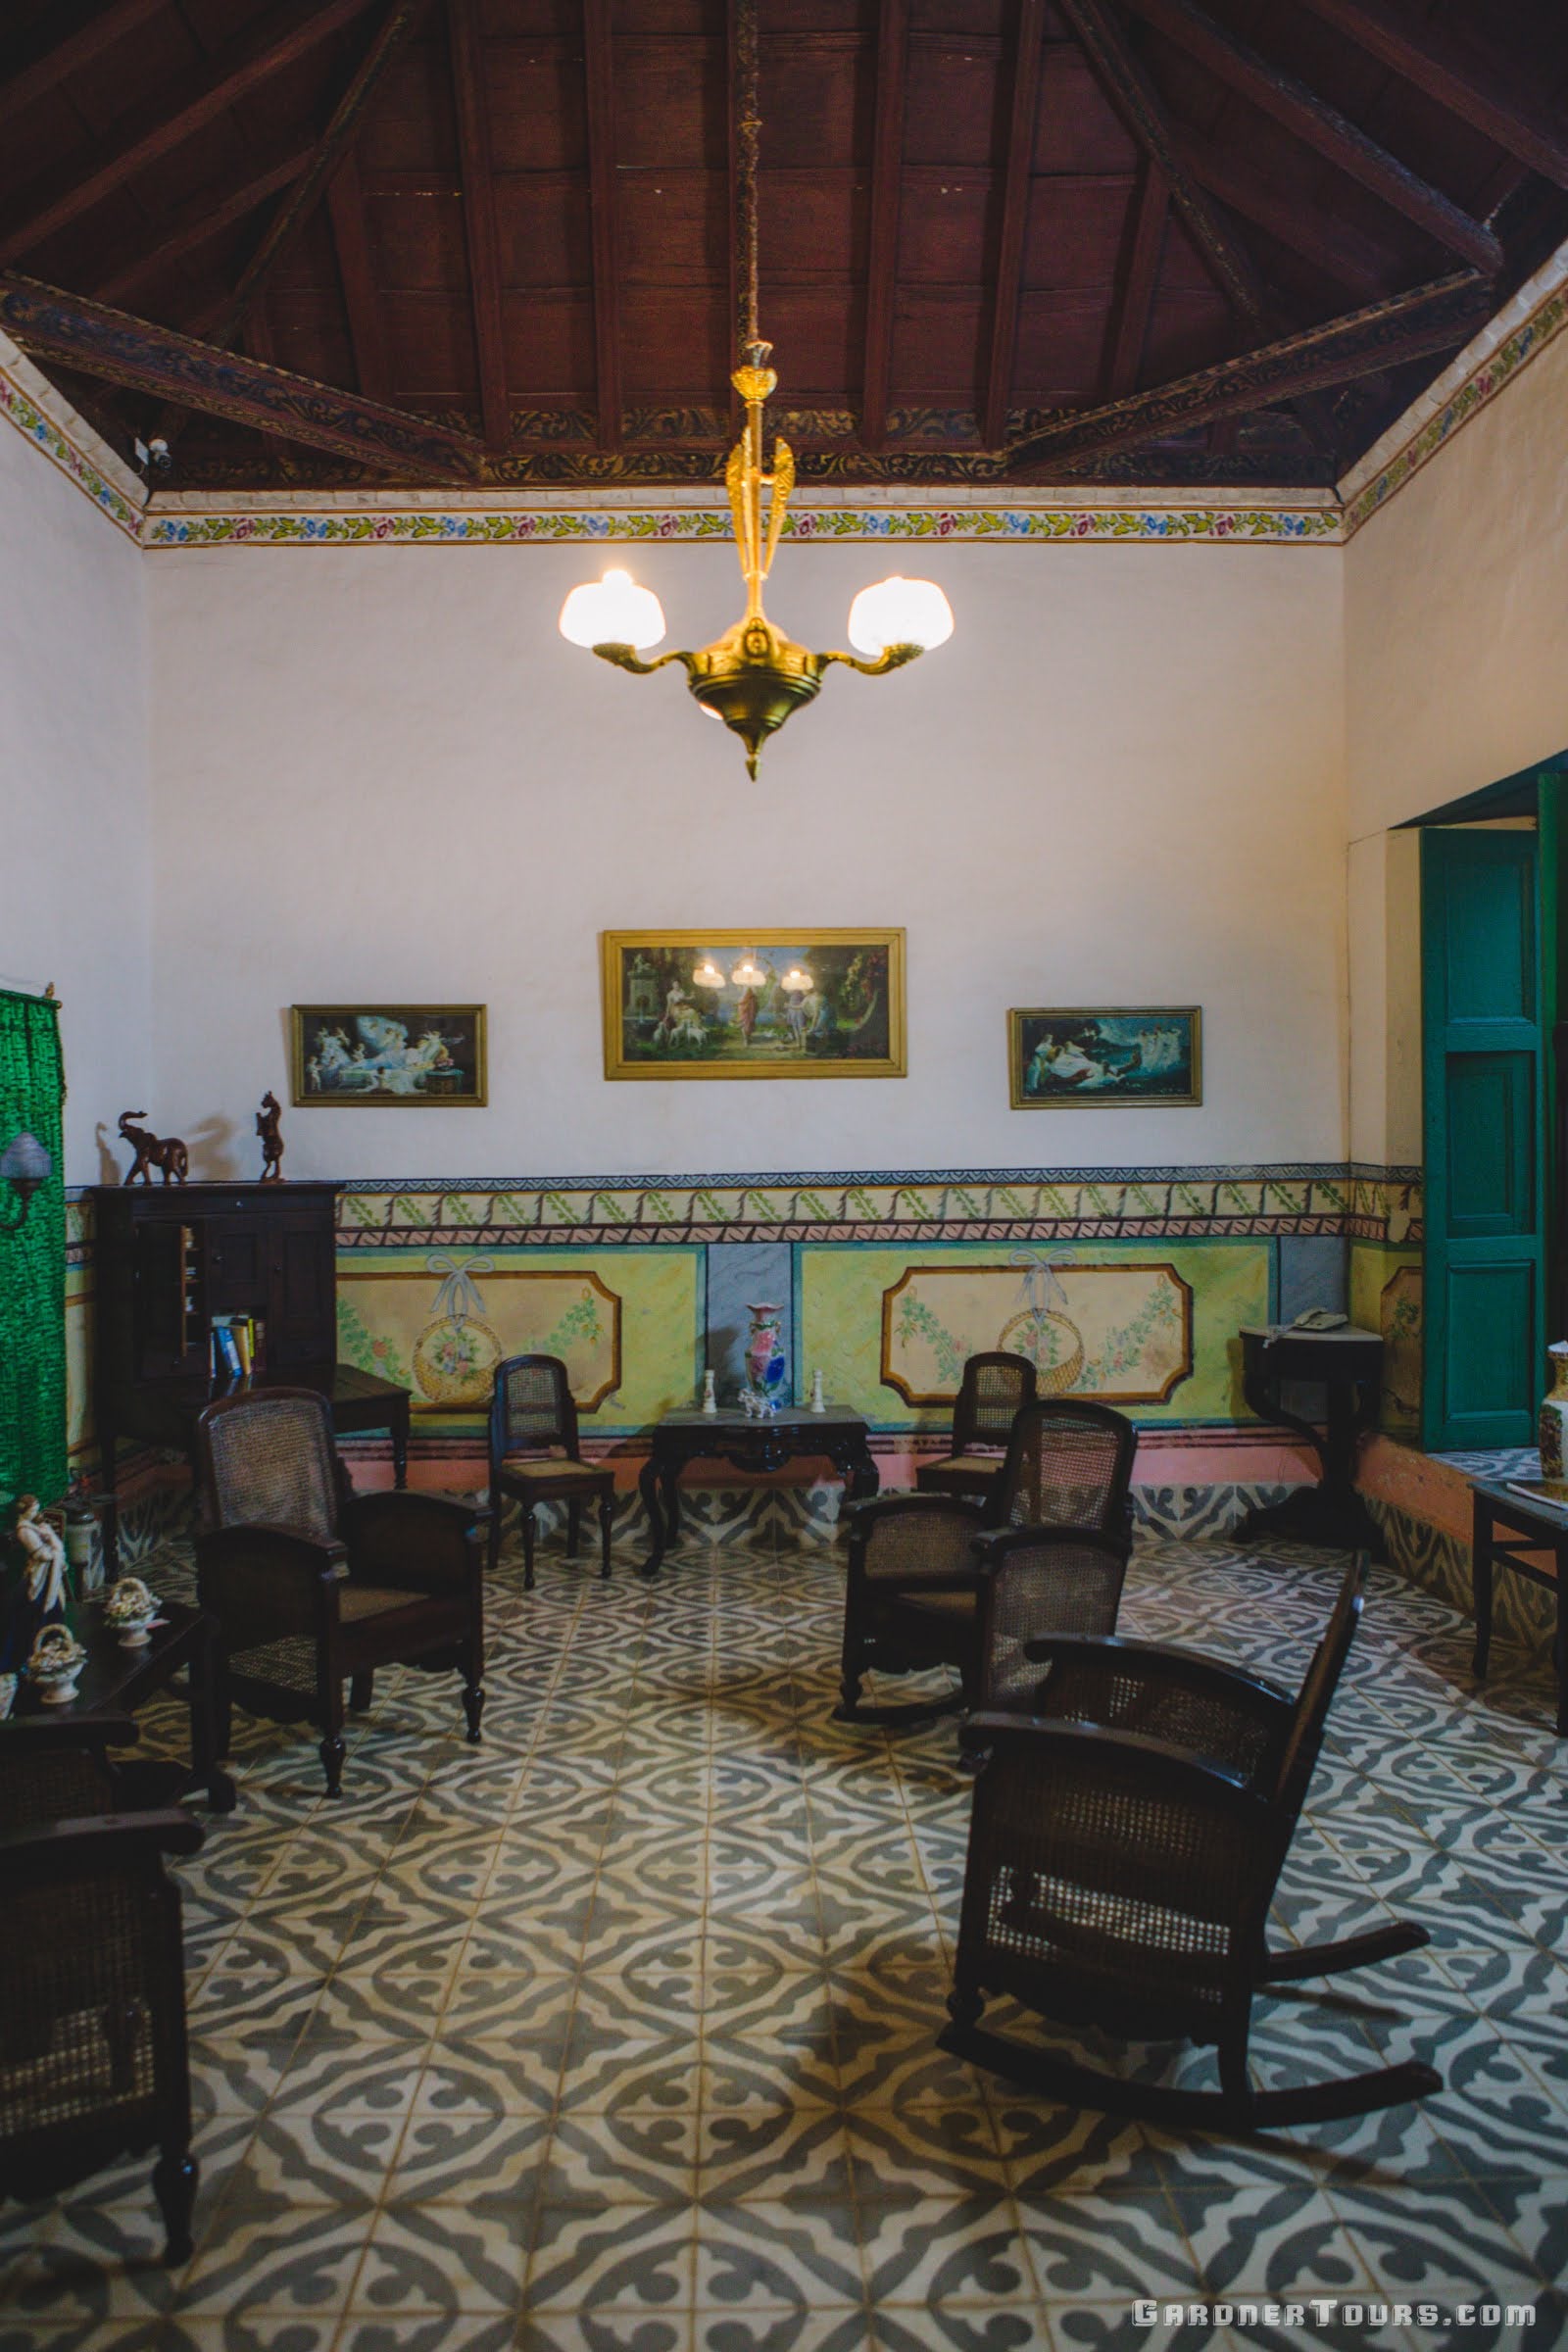 Classic 1700s colorful green and white Living Room Sala in a 3-star Casa Particular BnB in Trinidad, Cuba